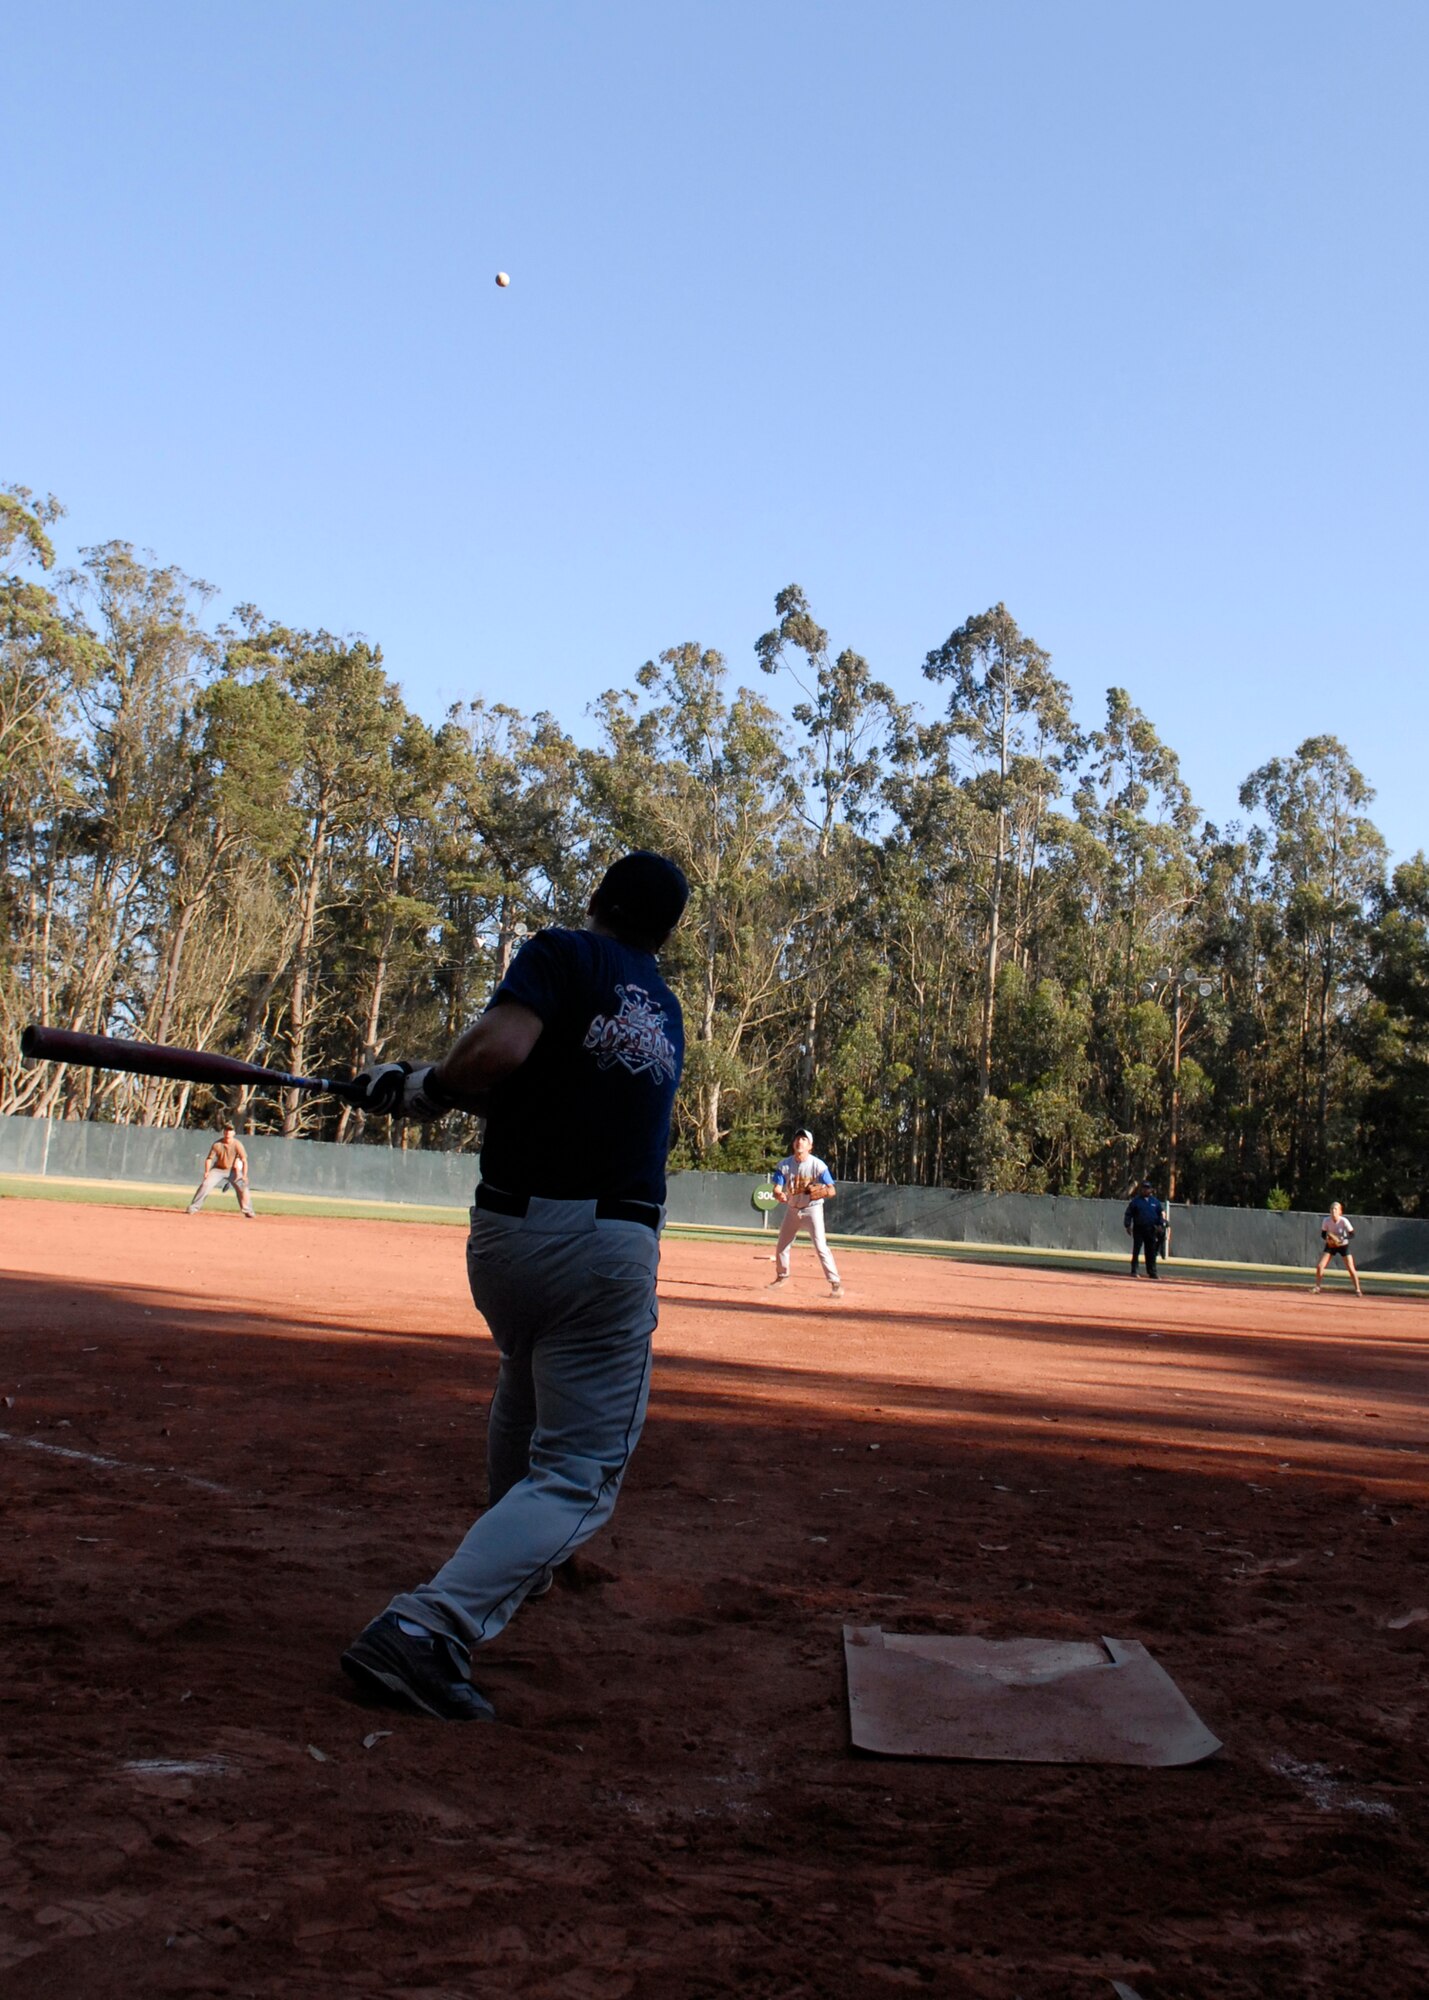 VANDENBERG AIR FORCE BASE, Calif. --  The 30th Force Support Squadron and the 30th Launch Group square off in their intramural softball game June 30 here. The 30th LCG rocketed past the force support 17-9. (U.S. Air Force photo/Airman 1st Class Andrew Satran)
